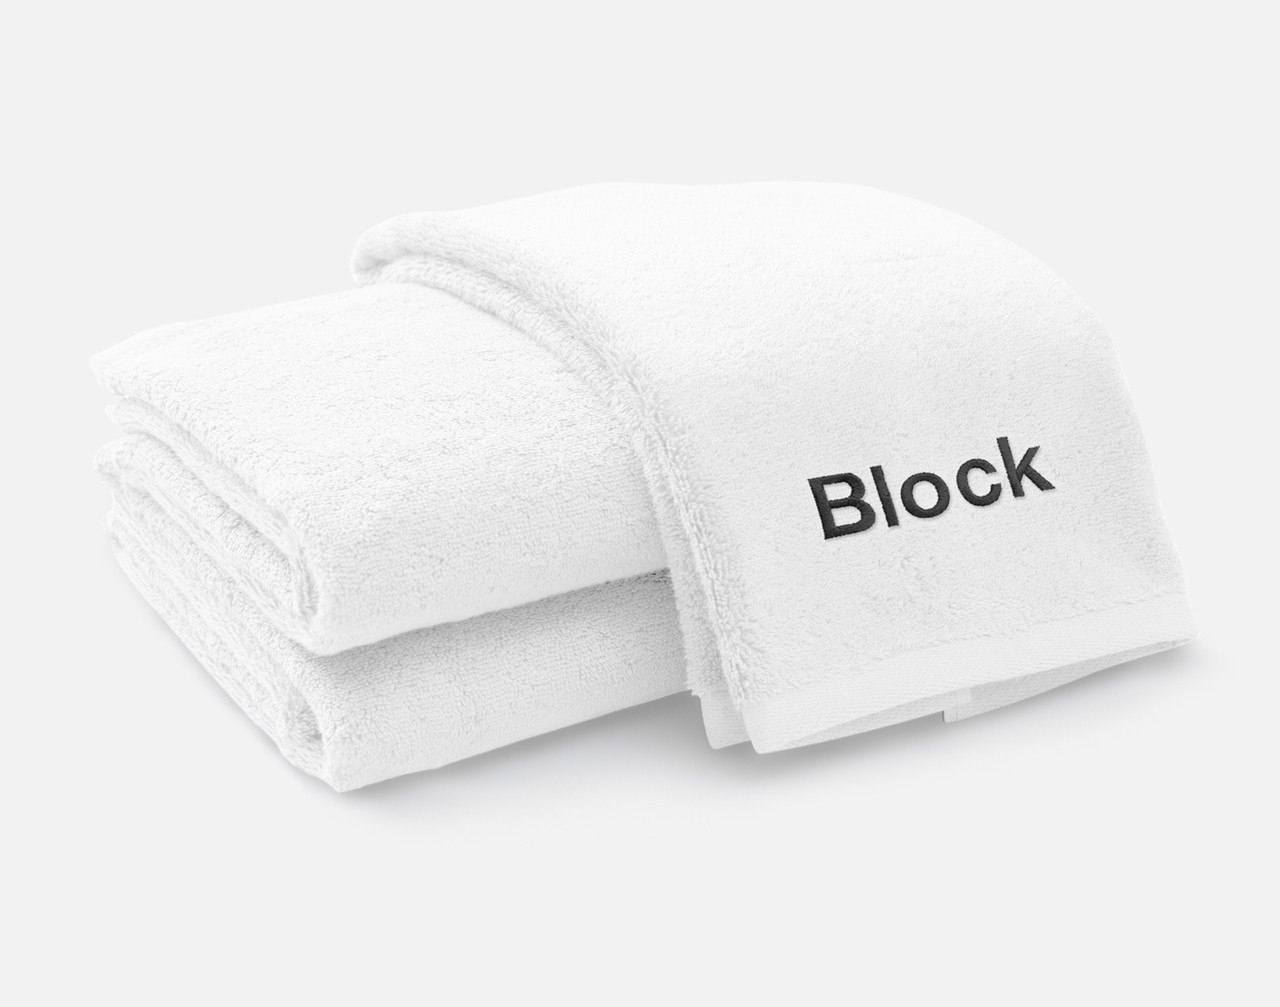 Folded view of our Custom Embroidered Towel Set in White, featuring Block font embroidered in white black along its bottom edge.